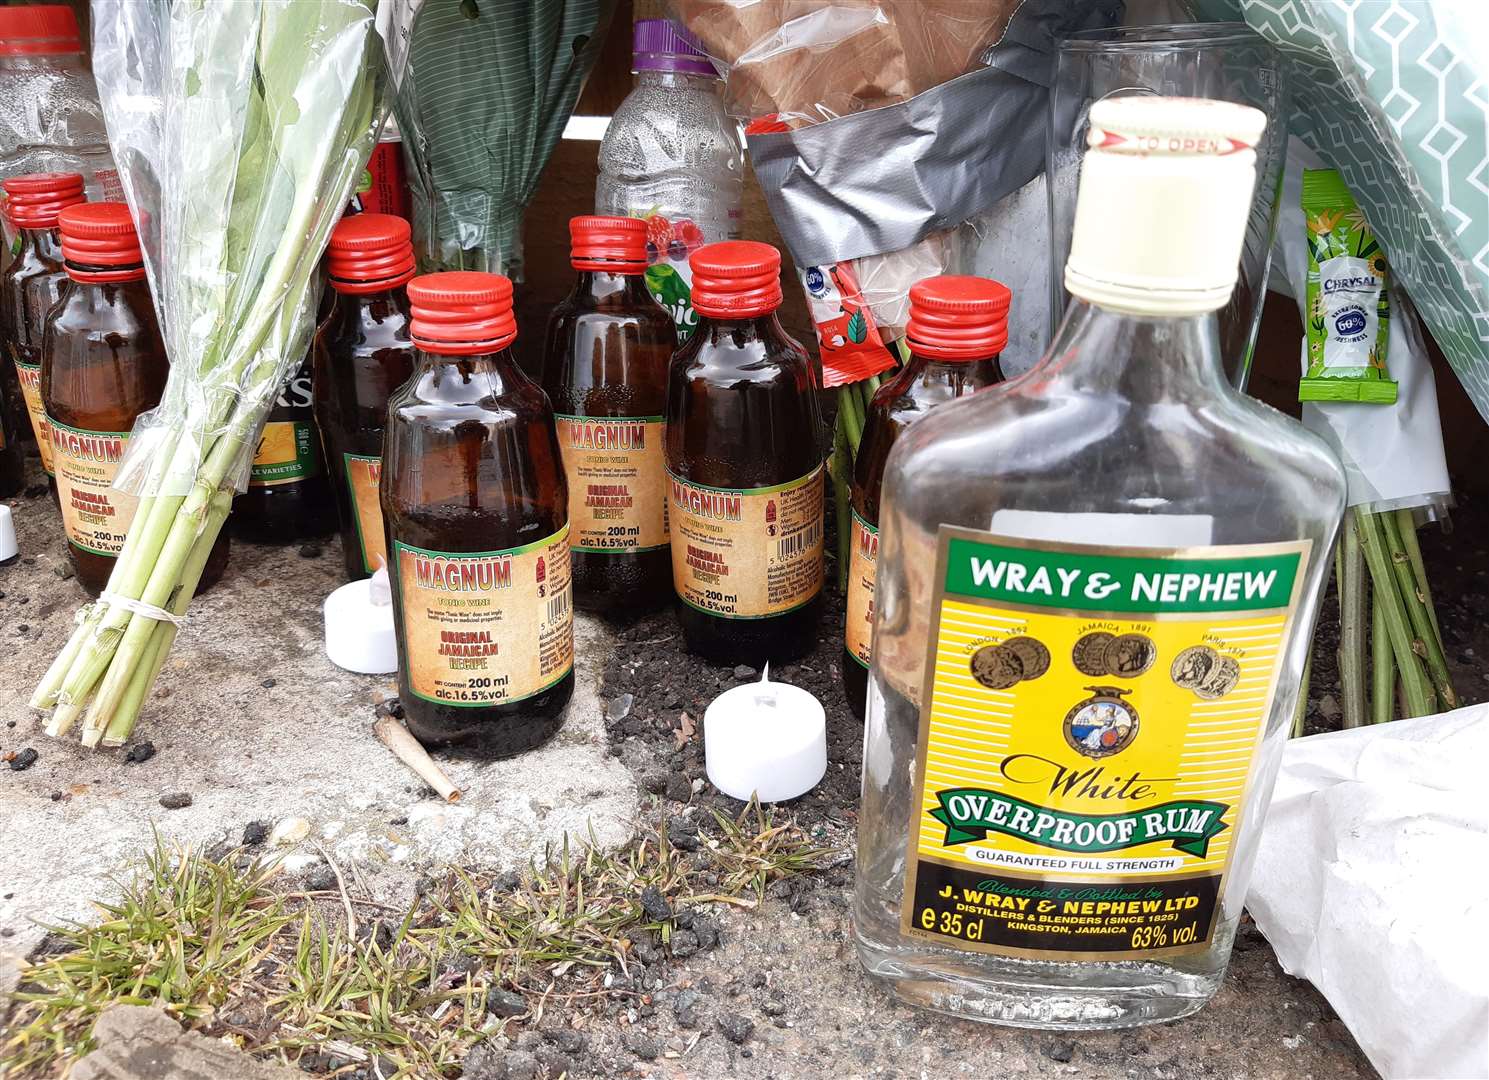 Bottles of rum and tonic wine have been left in Hunter Road